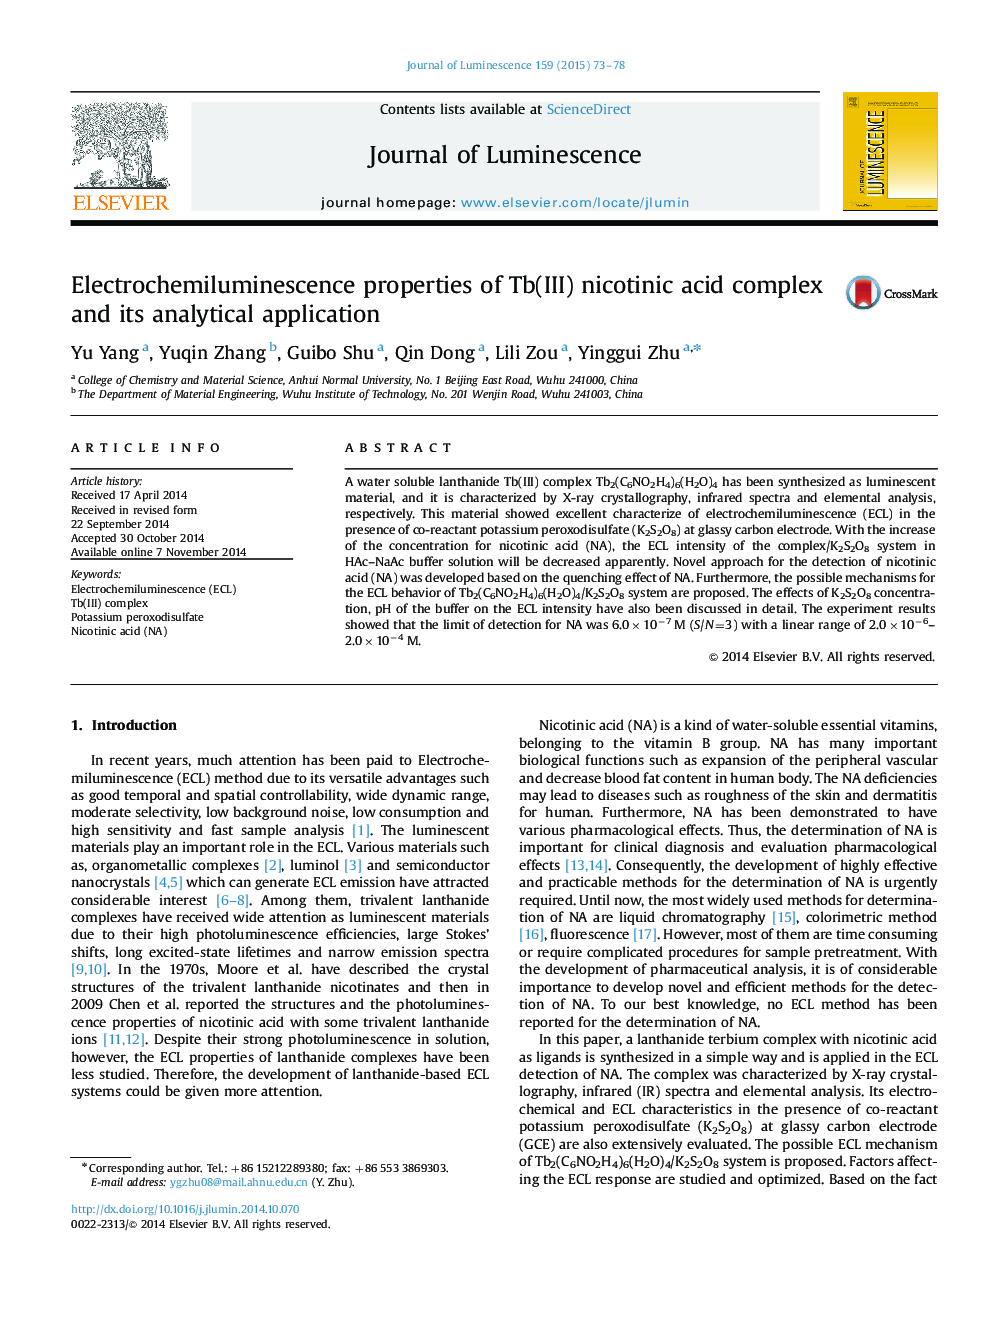 Electrochemiluminescence properties of Tb(III) nicotinic acid complex and its analytical application